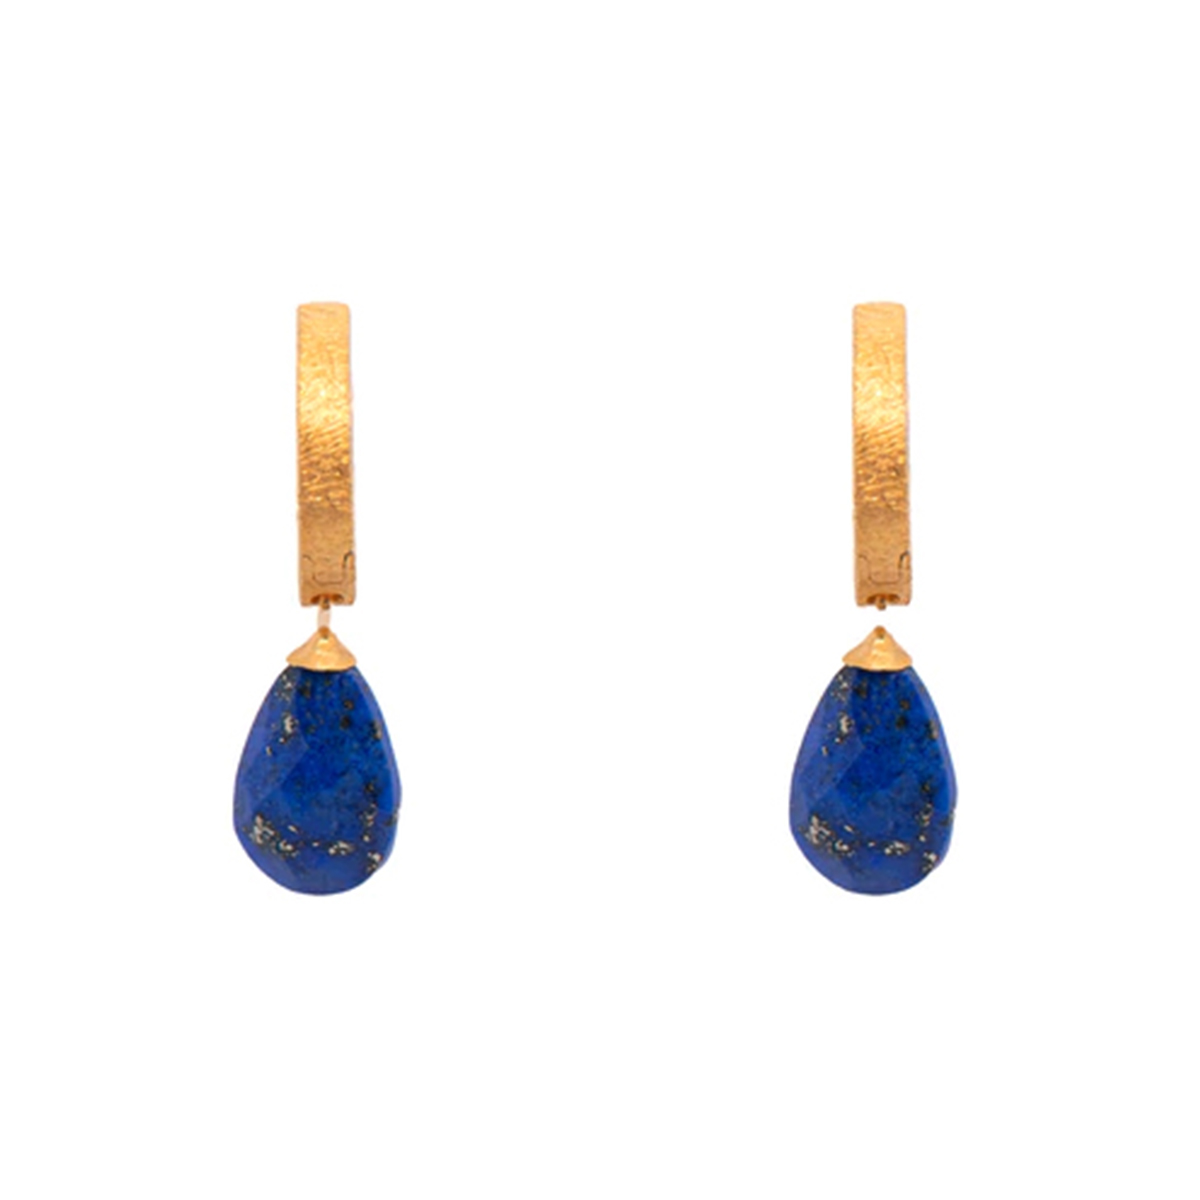 24K Yellow Gold Plated Sterling Silver Lapis Huggie Earrings